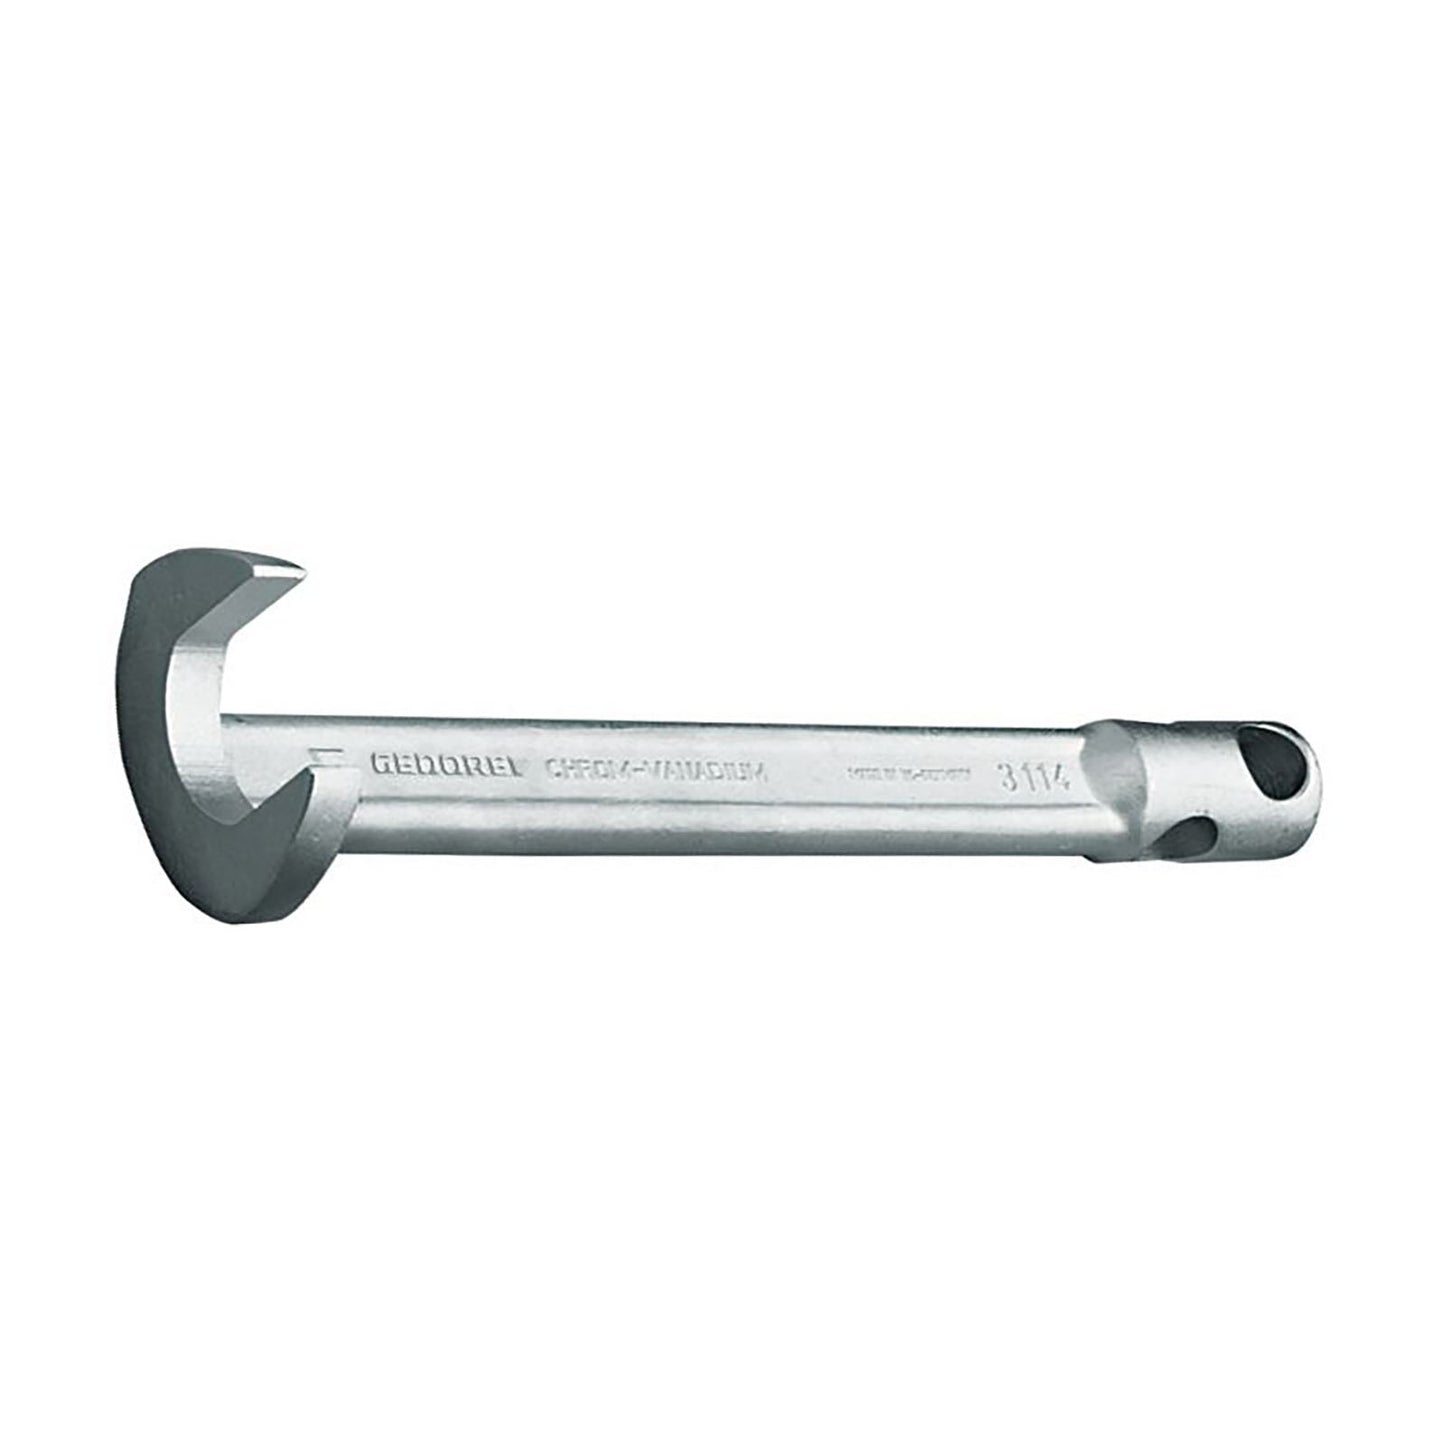 GEDORE 3114 24 - Forked Foot Wrench, 24mm (6670640)